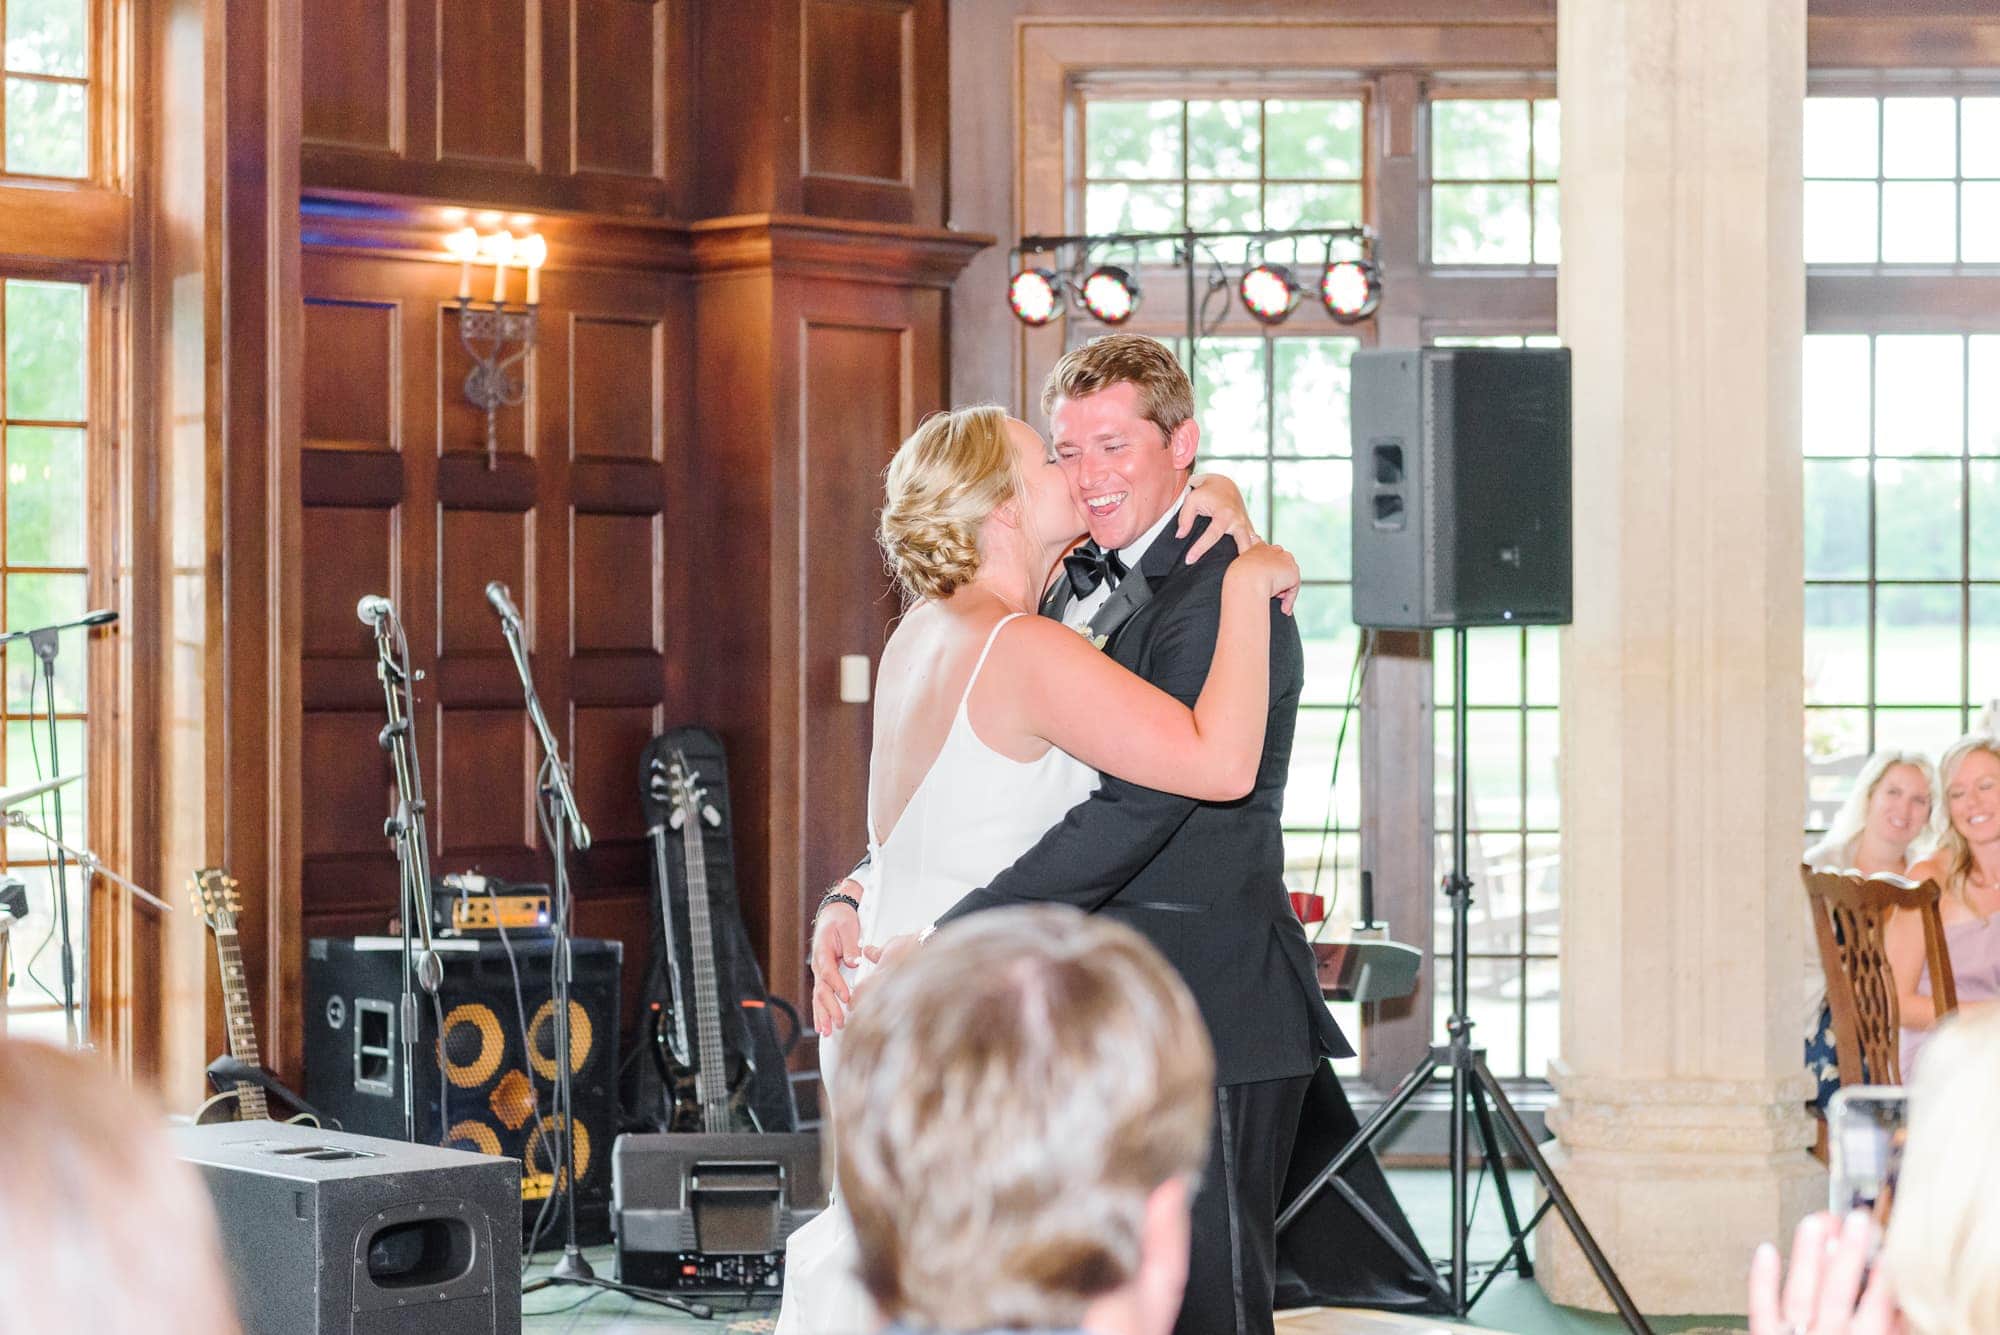 Casey looks ecstatic as Lauren kisses his cheek during their first dance at the Longview Country Club in Charlotte.